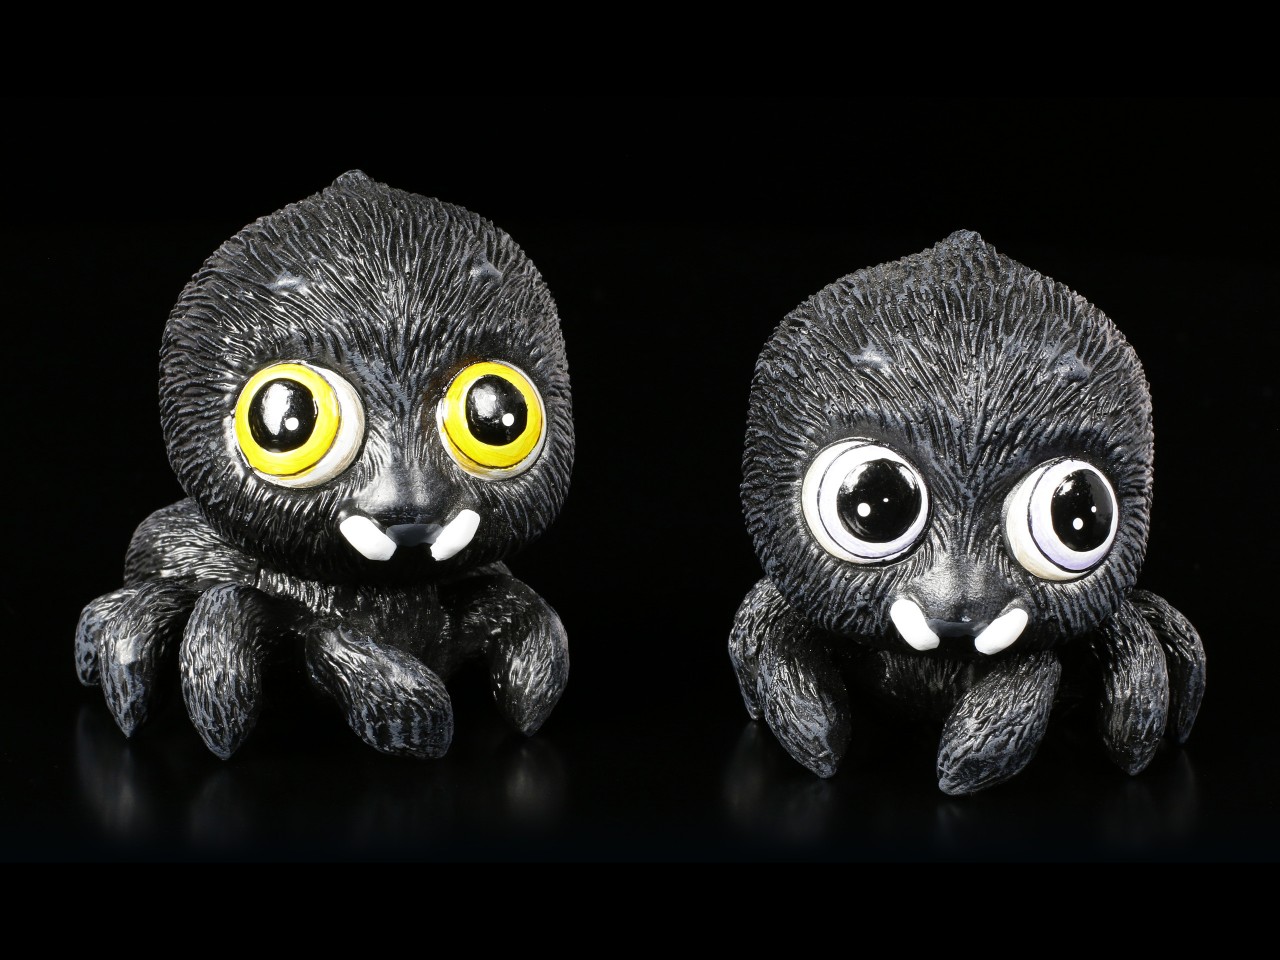 Spider Figurines - Incy and Wincy - Set of 2